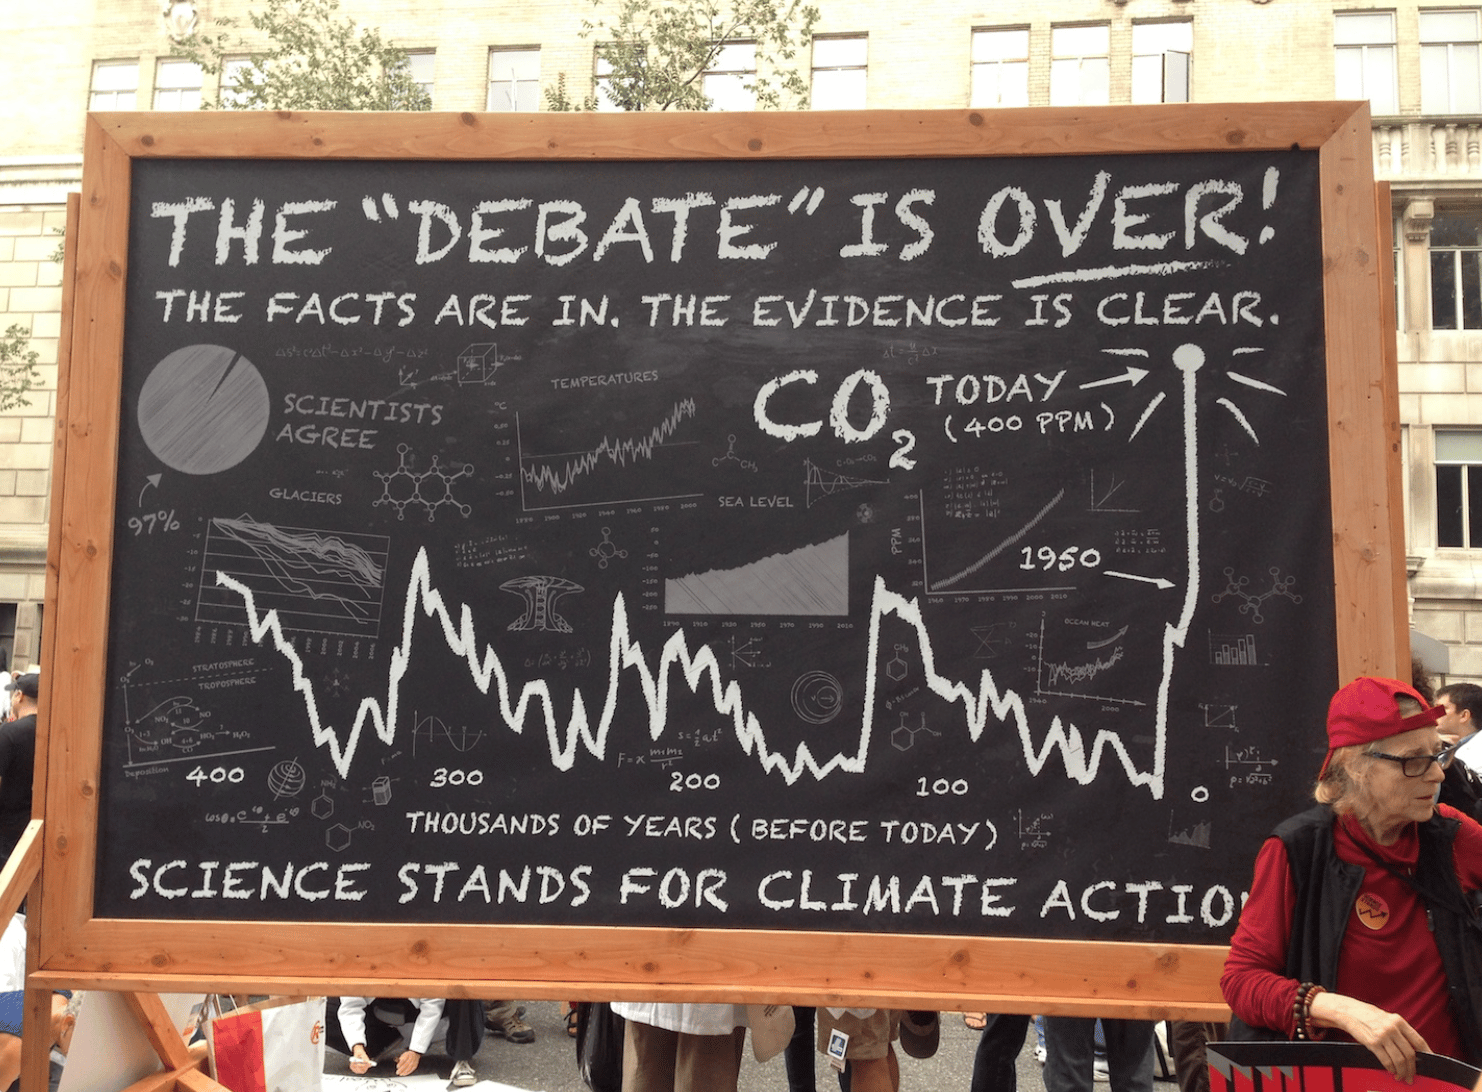 The ‘debate’ is OVER. Scientist march for action on climate change.